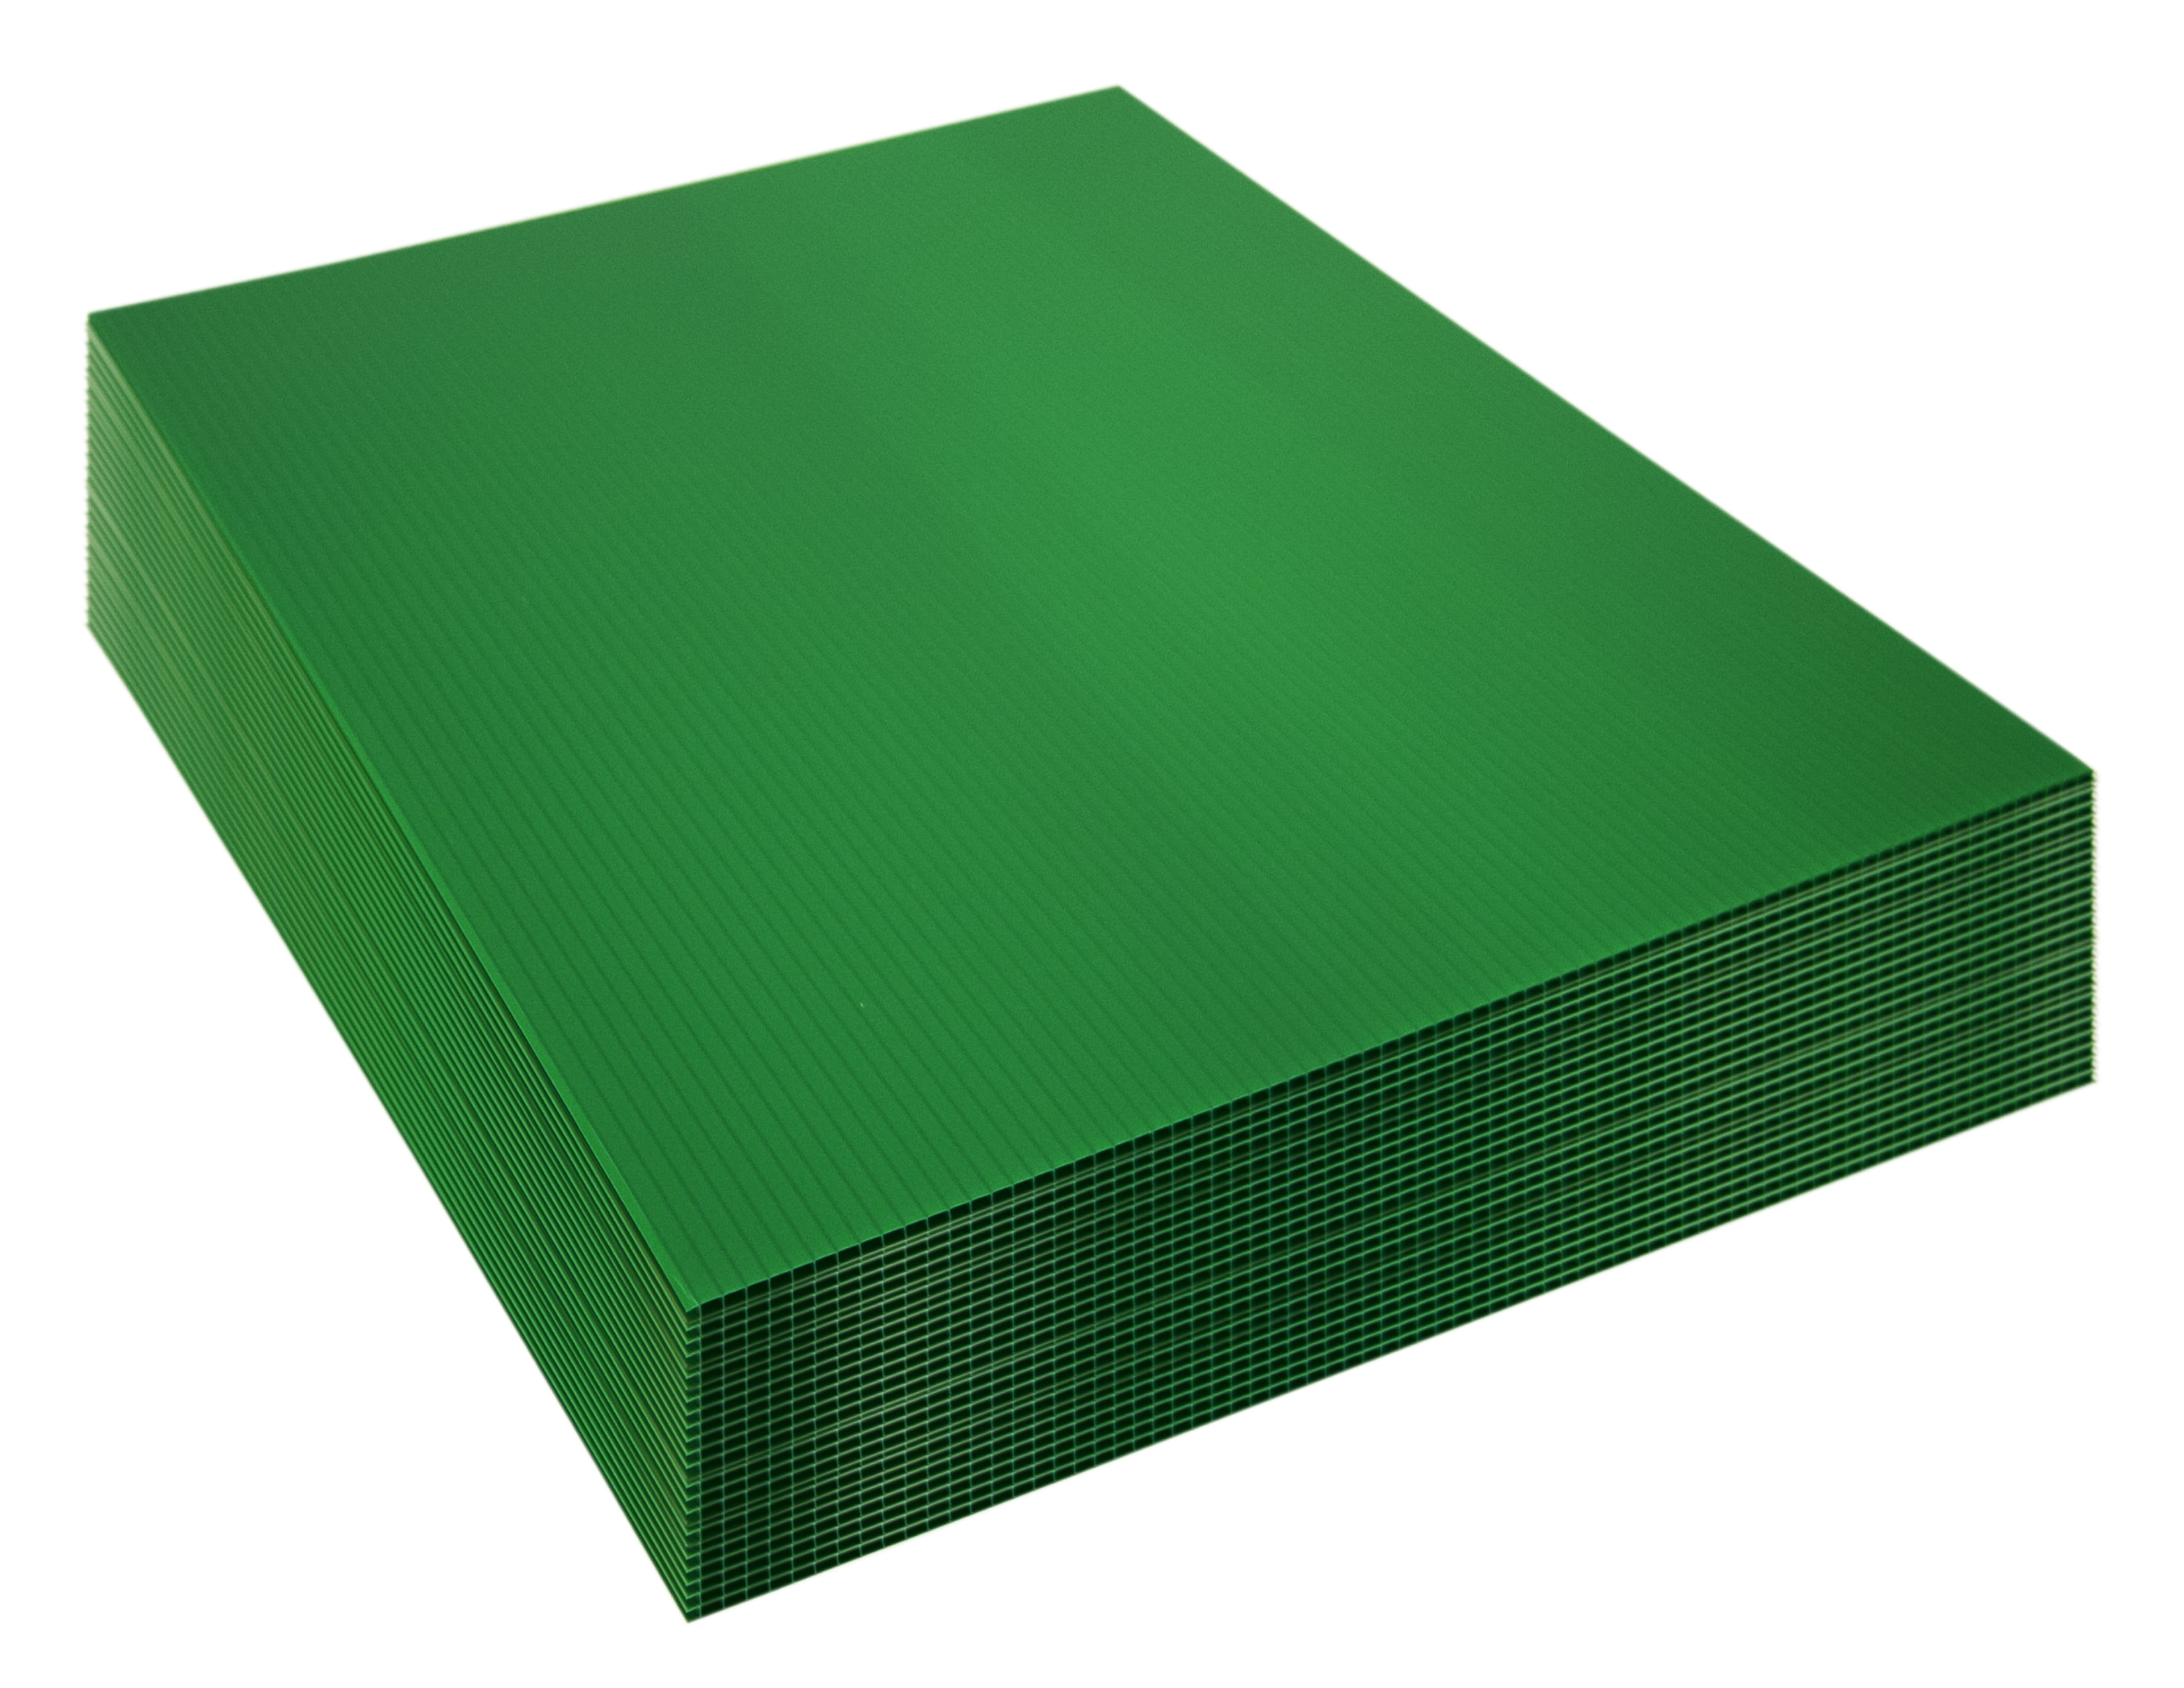 Corrugated Sheets with Guaranteed Strength and Durability